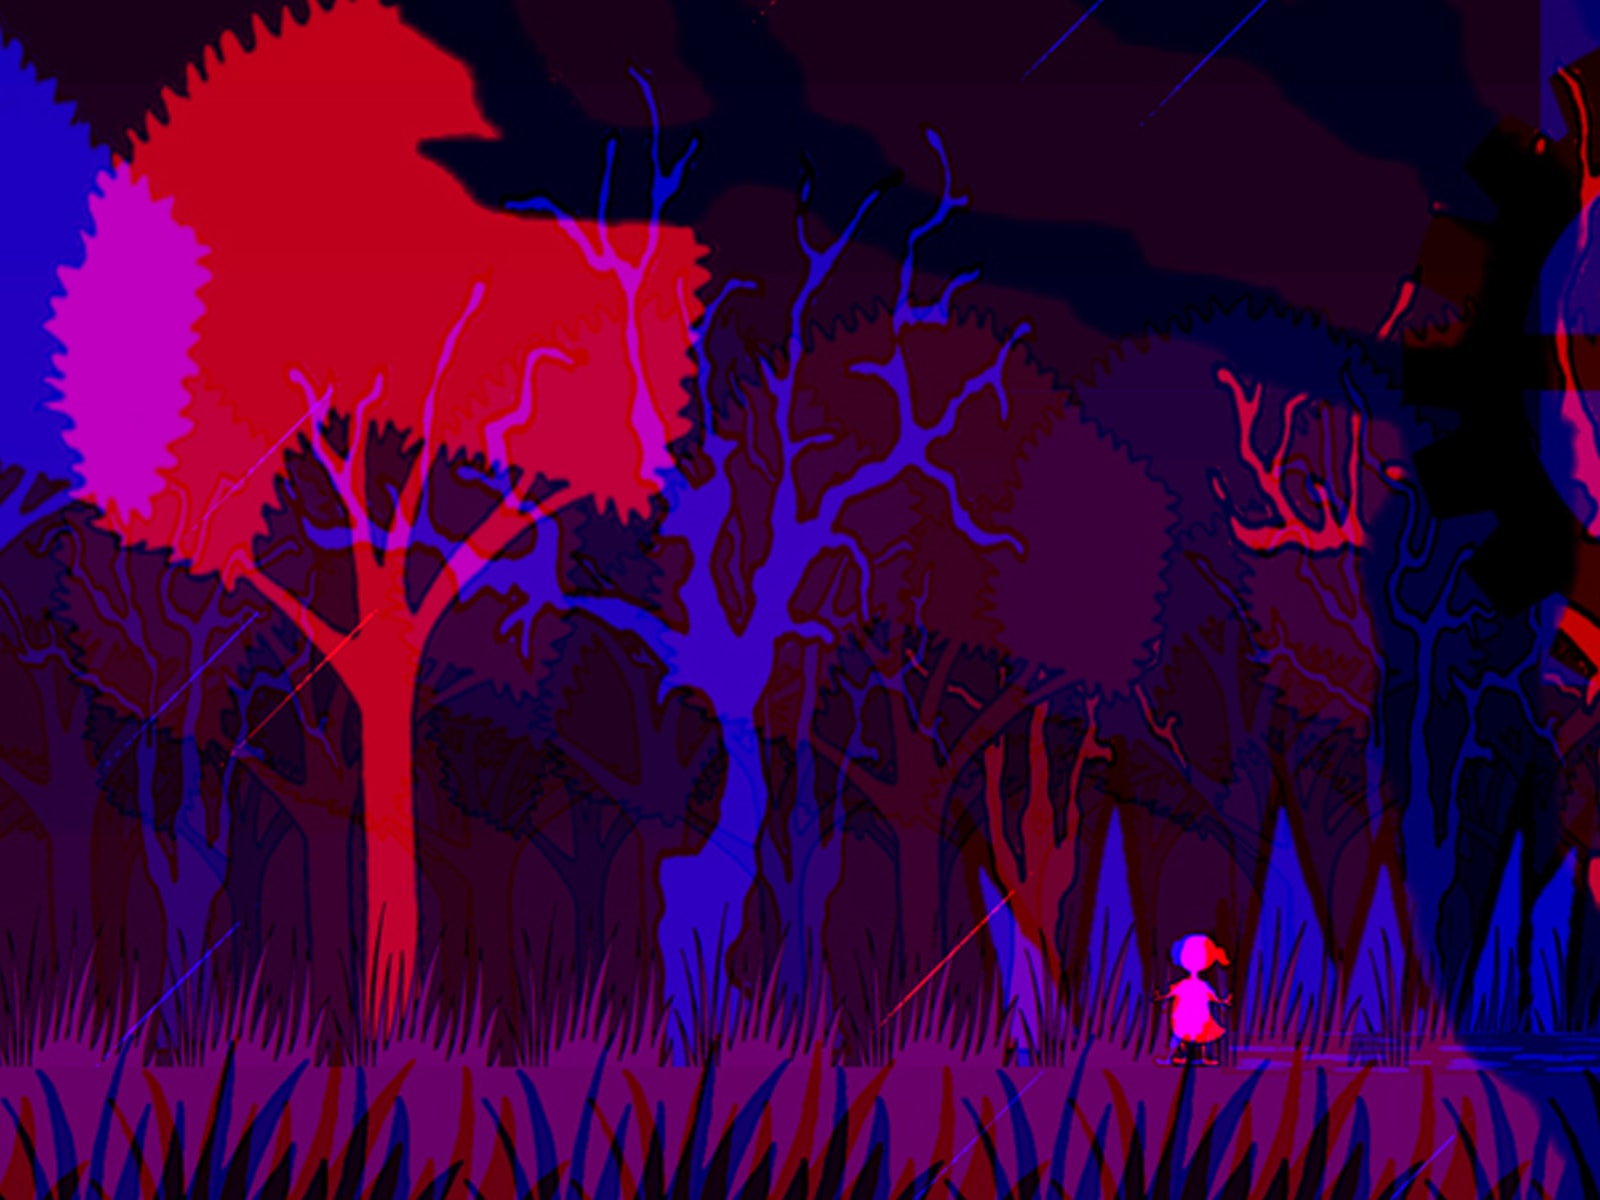 Screenshot from DigiPen student game Sunder of a small girl in a forest of blue, red and purple trees